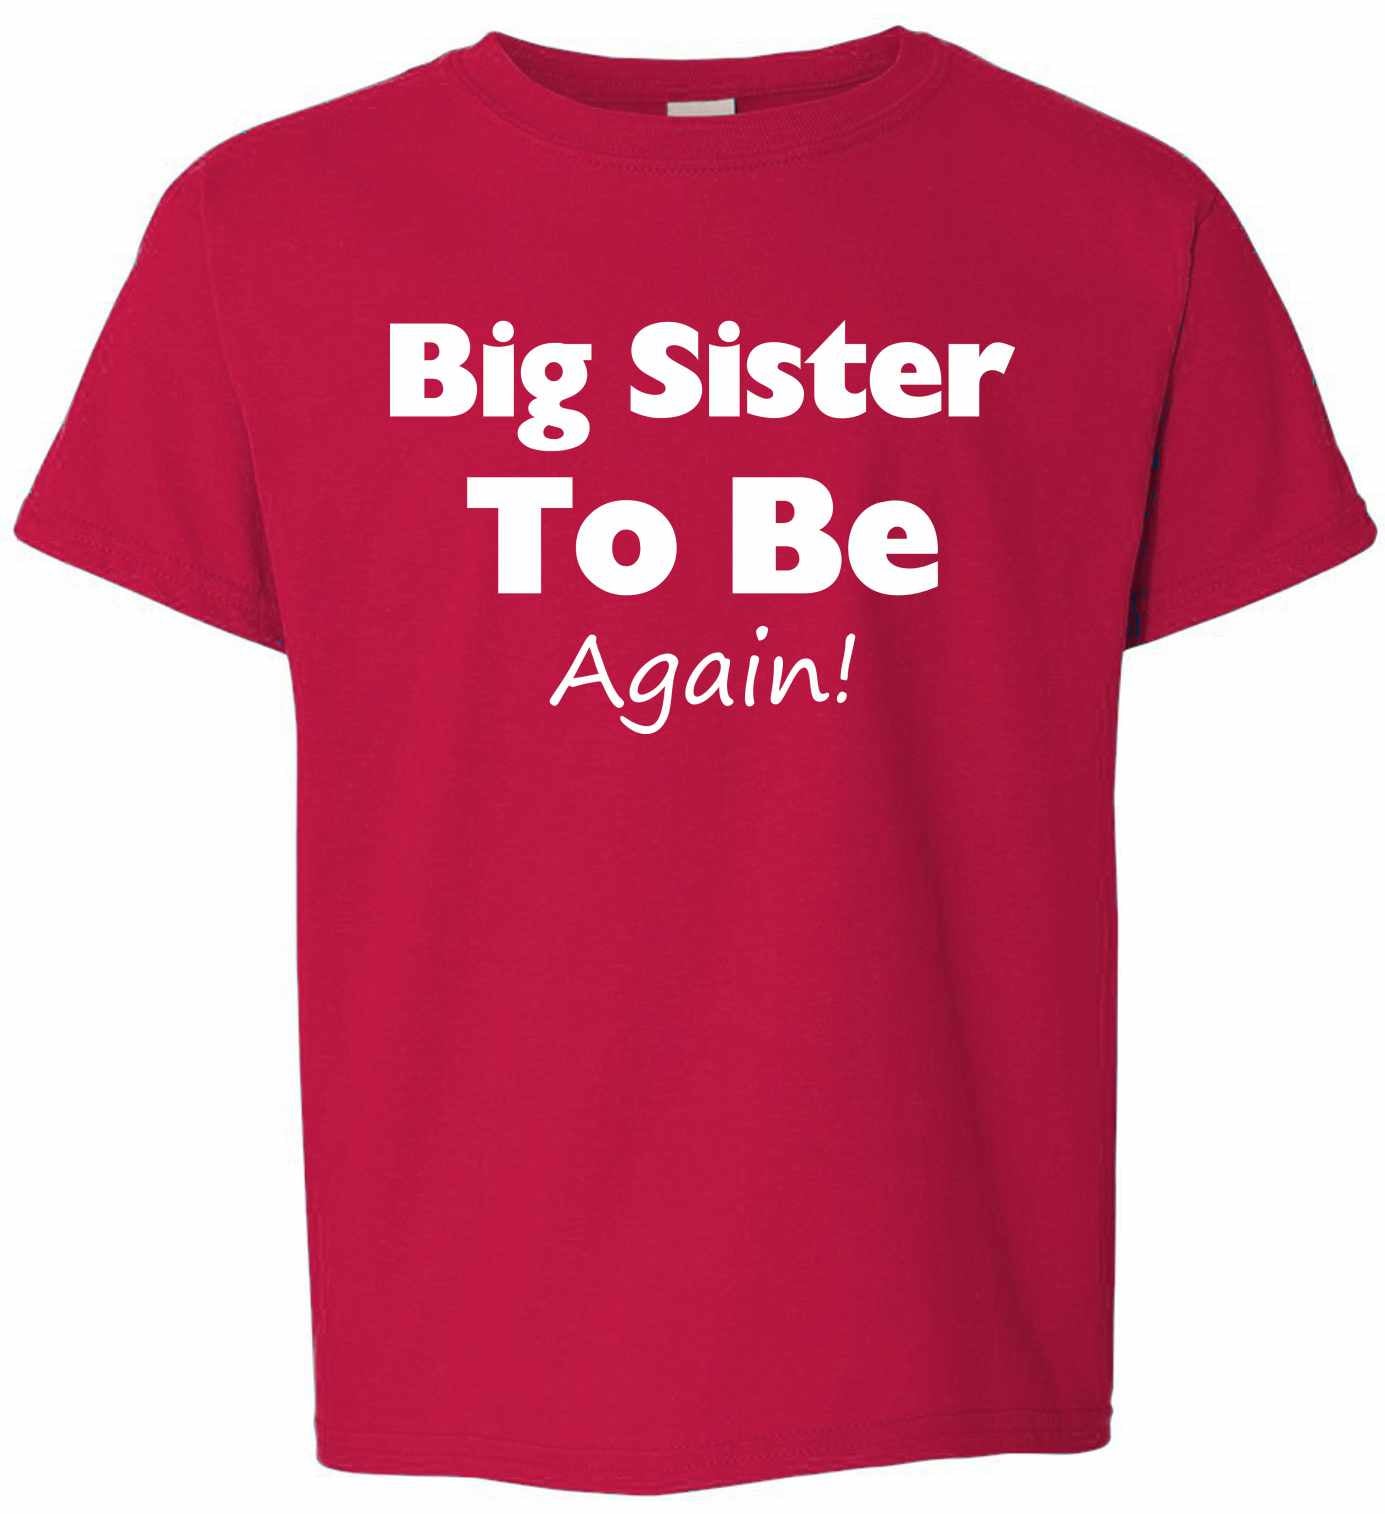 Big Sister To Be Again on Kids T-Shirt